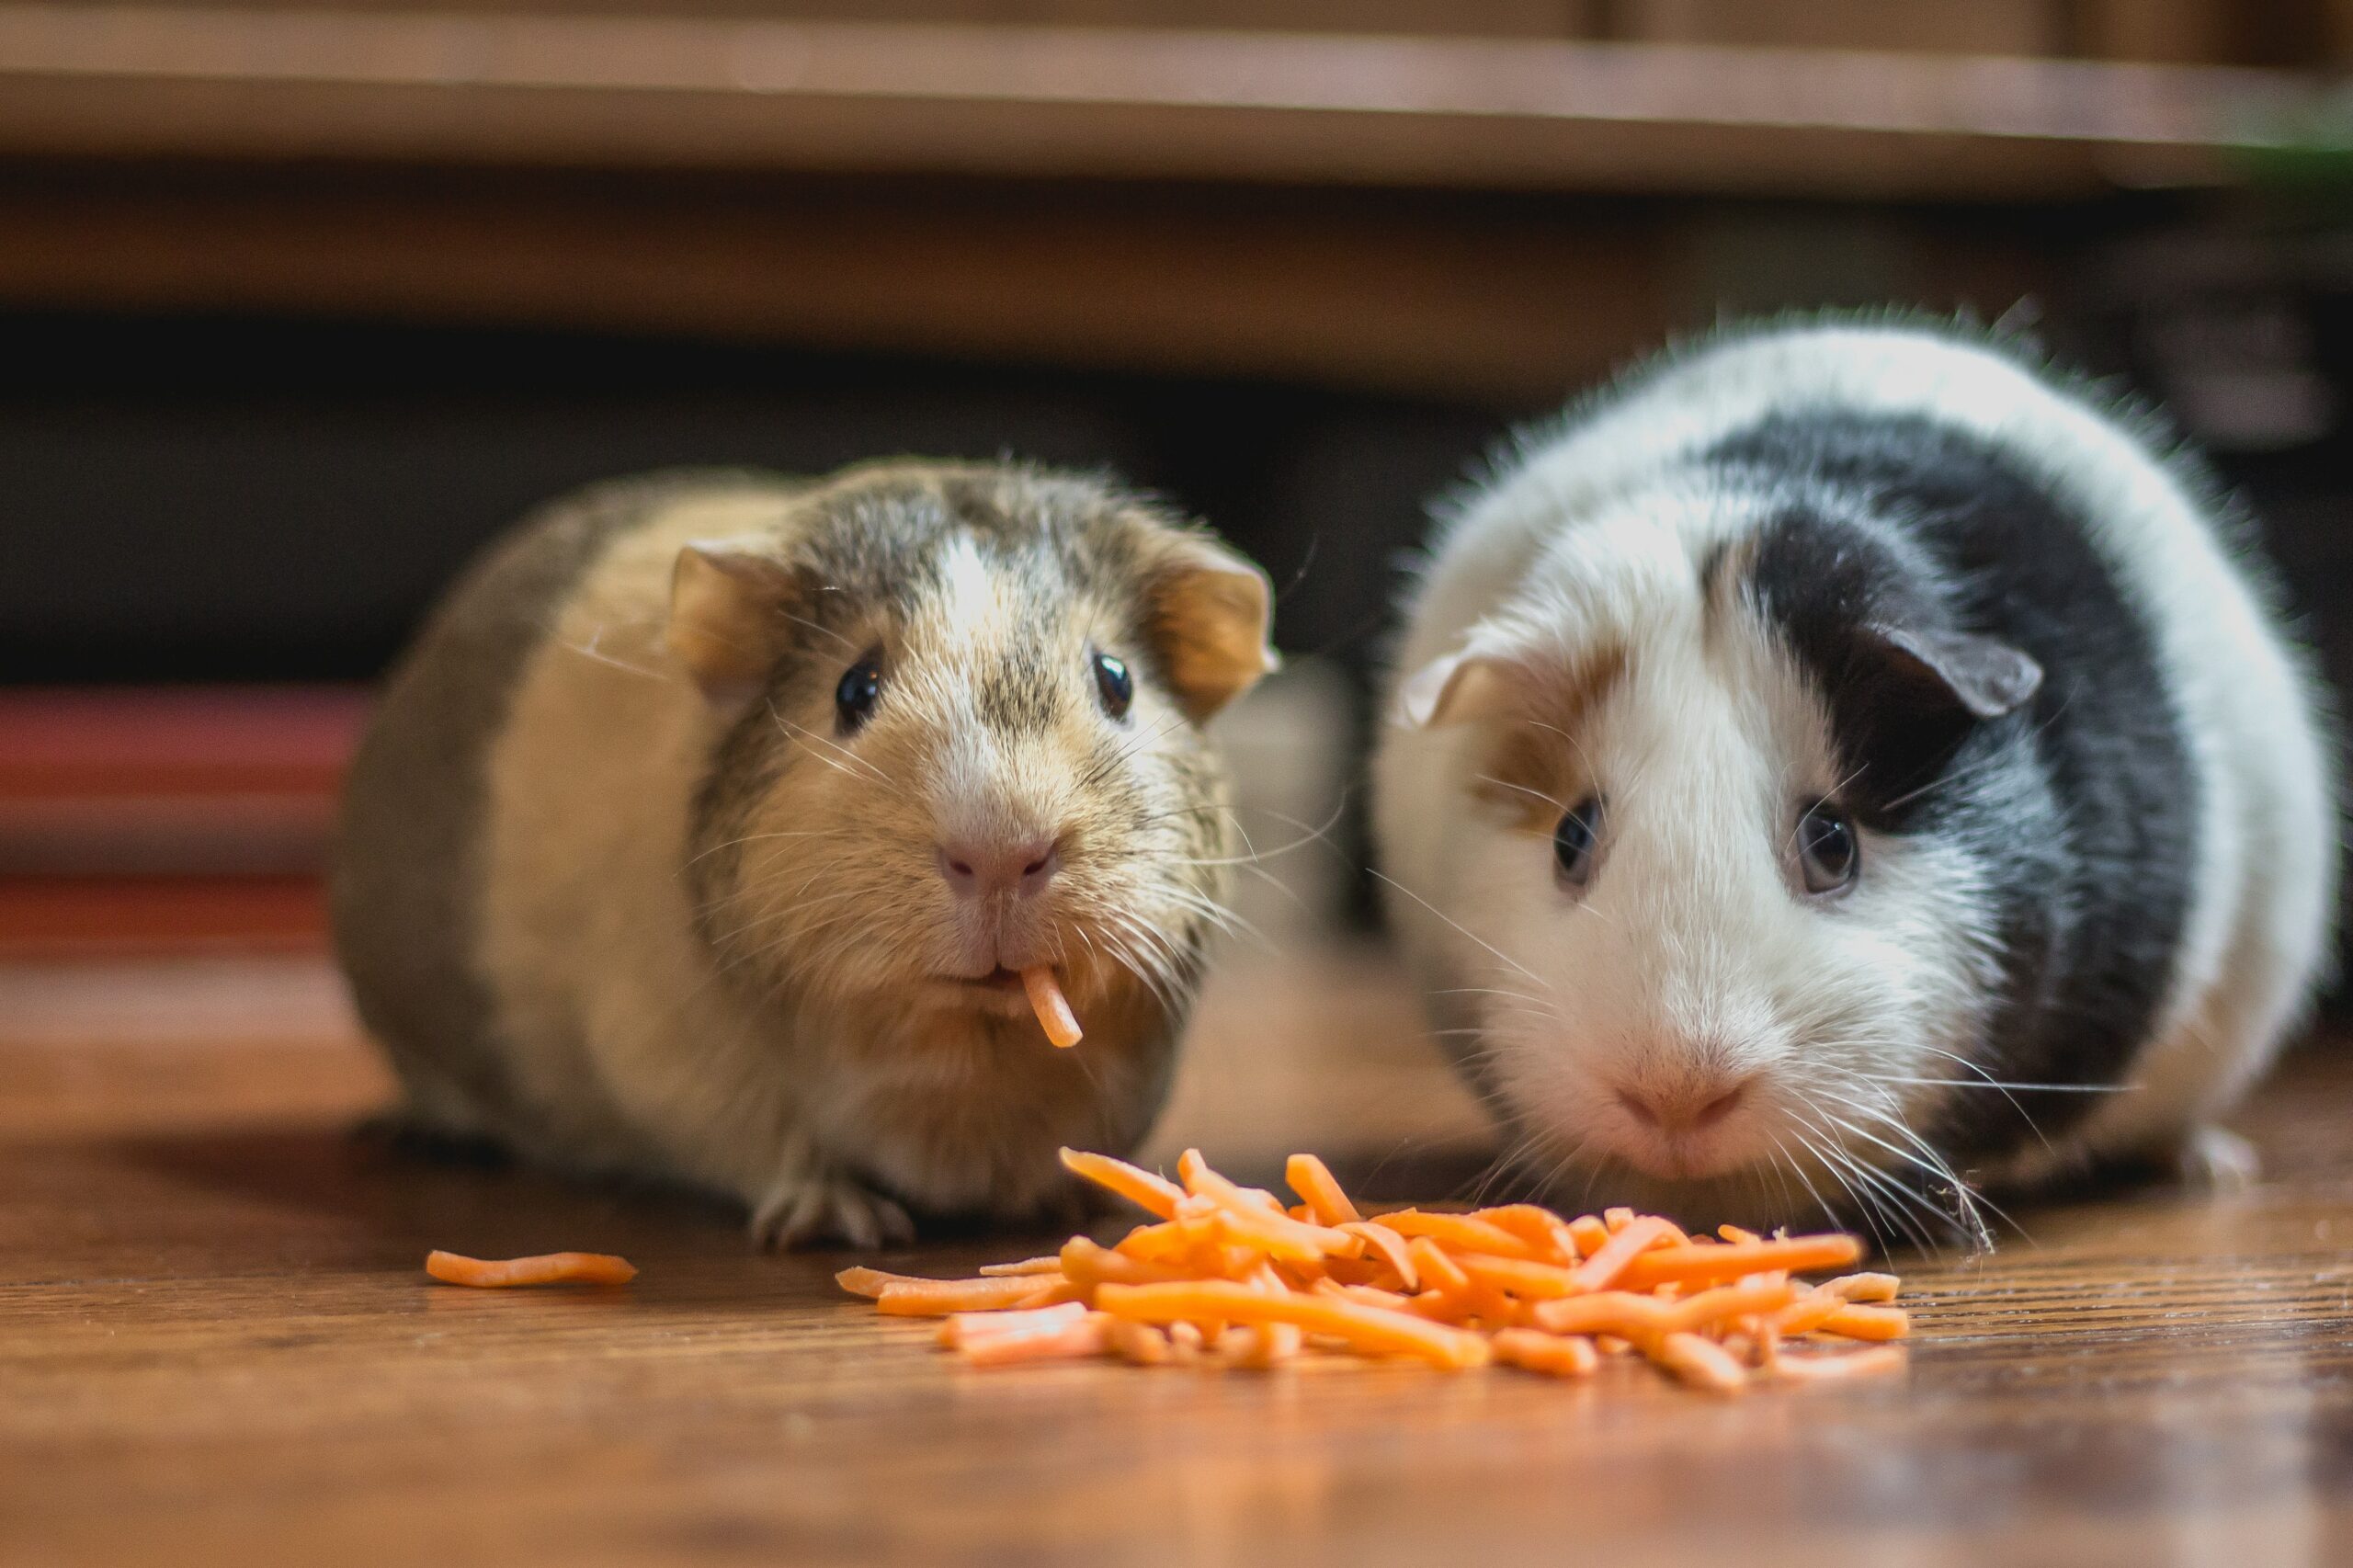 What should I feed my guinea pig?